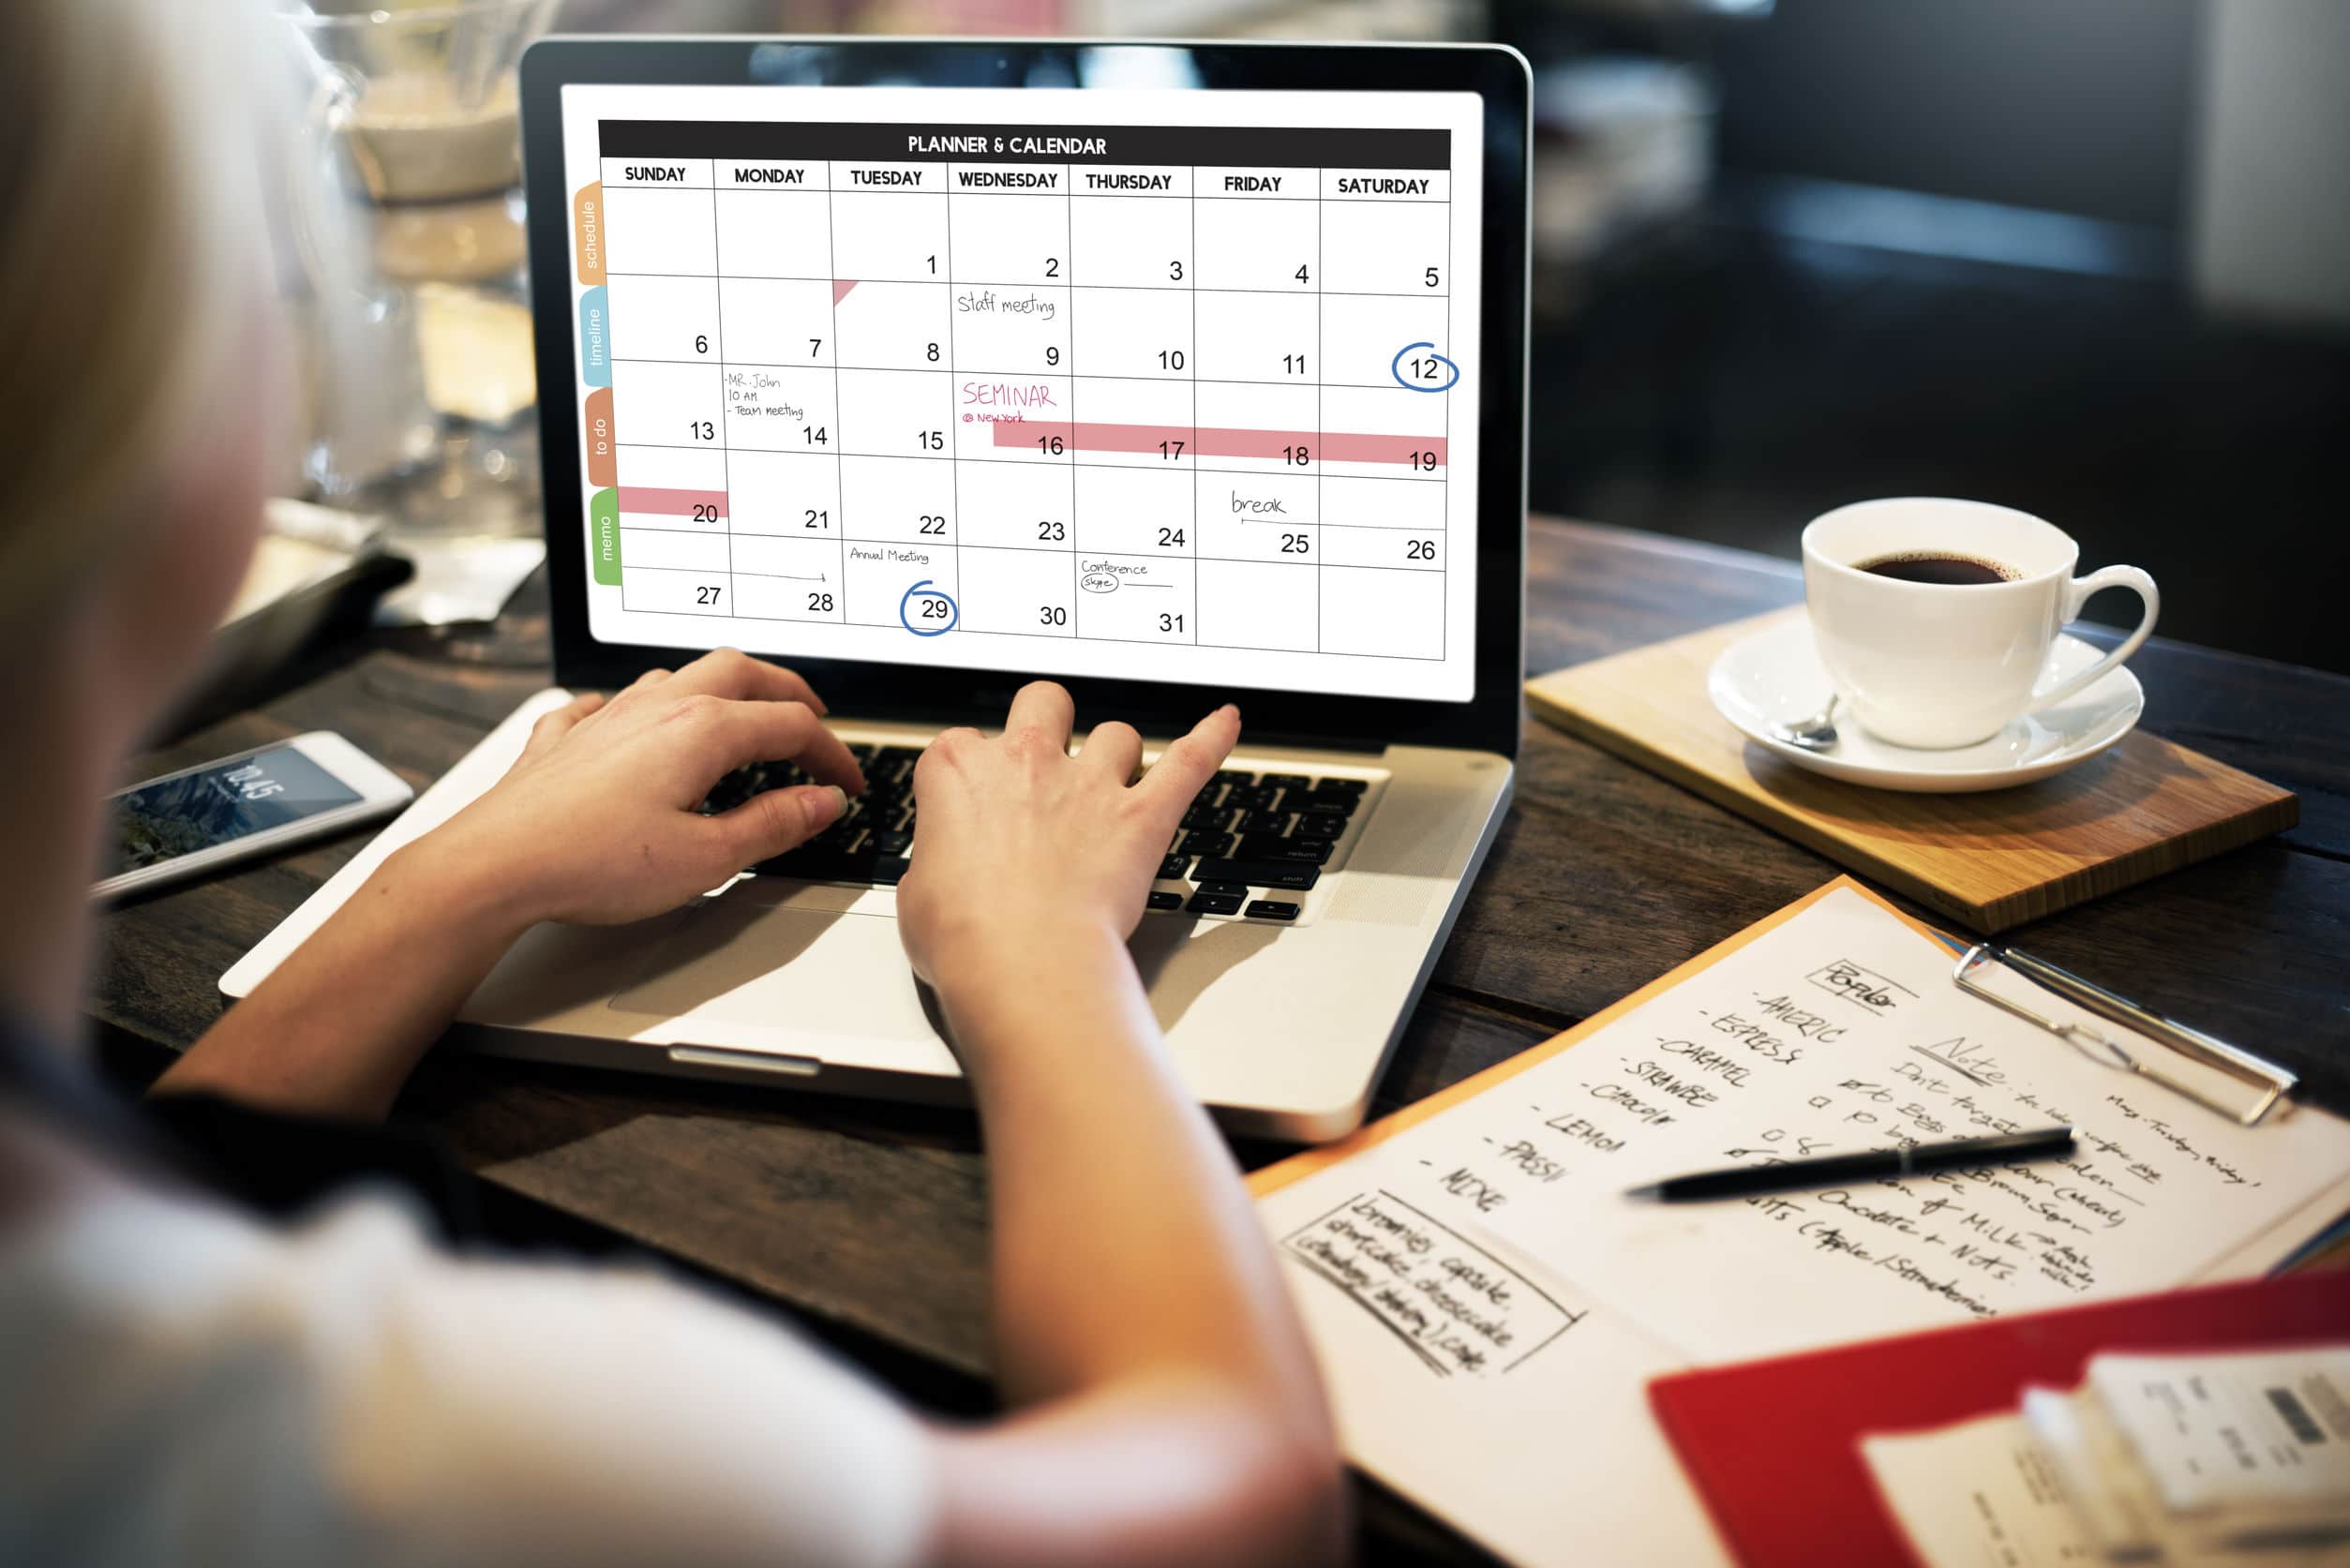 Learn to prioritize your monthly tasks so you don't get overwhelmed. 